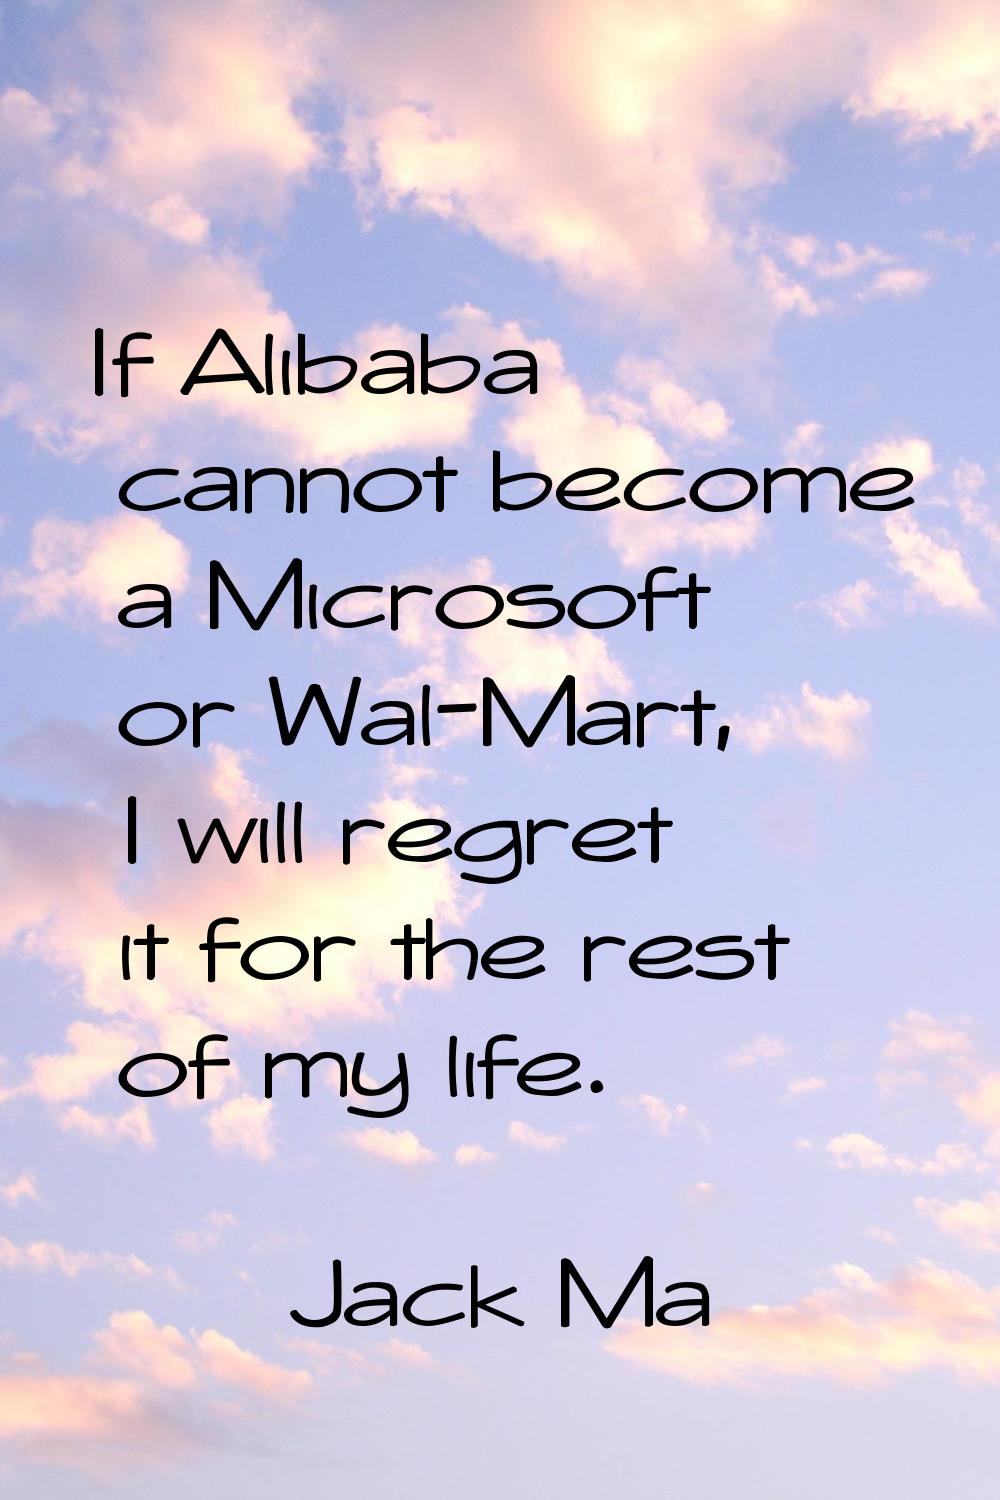 If Alibaba cannot become a Microsoft or Wal-Mart, I will regret it for the rest of my life.